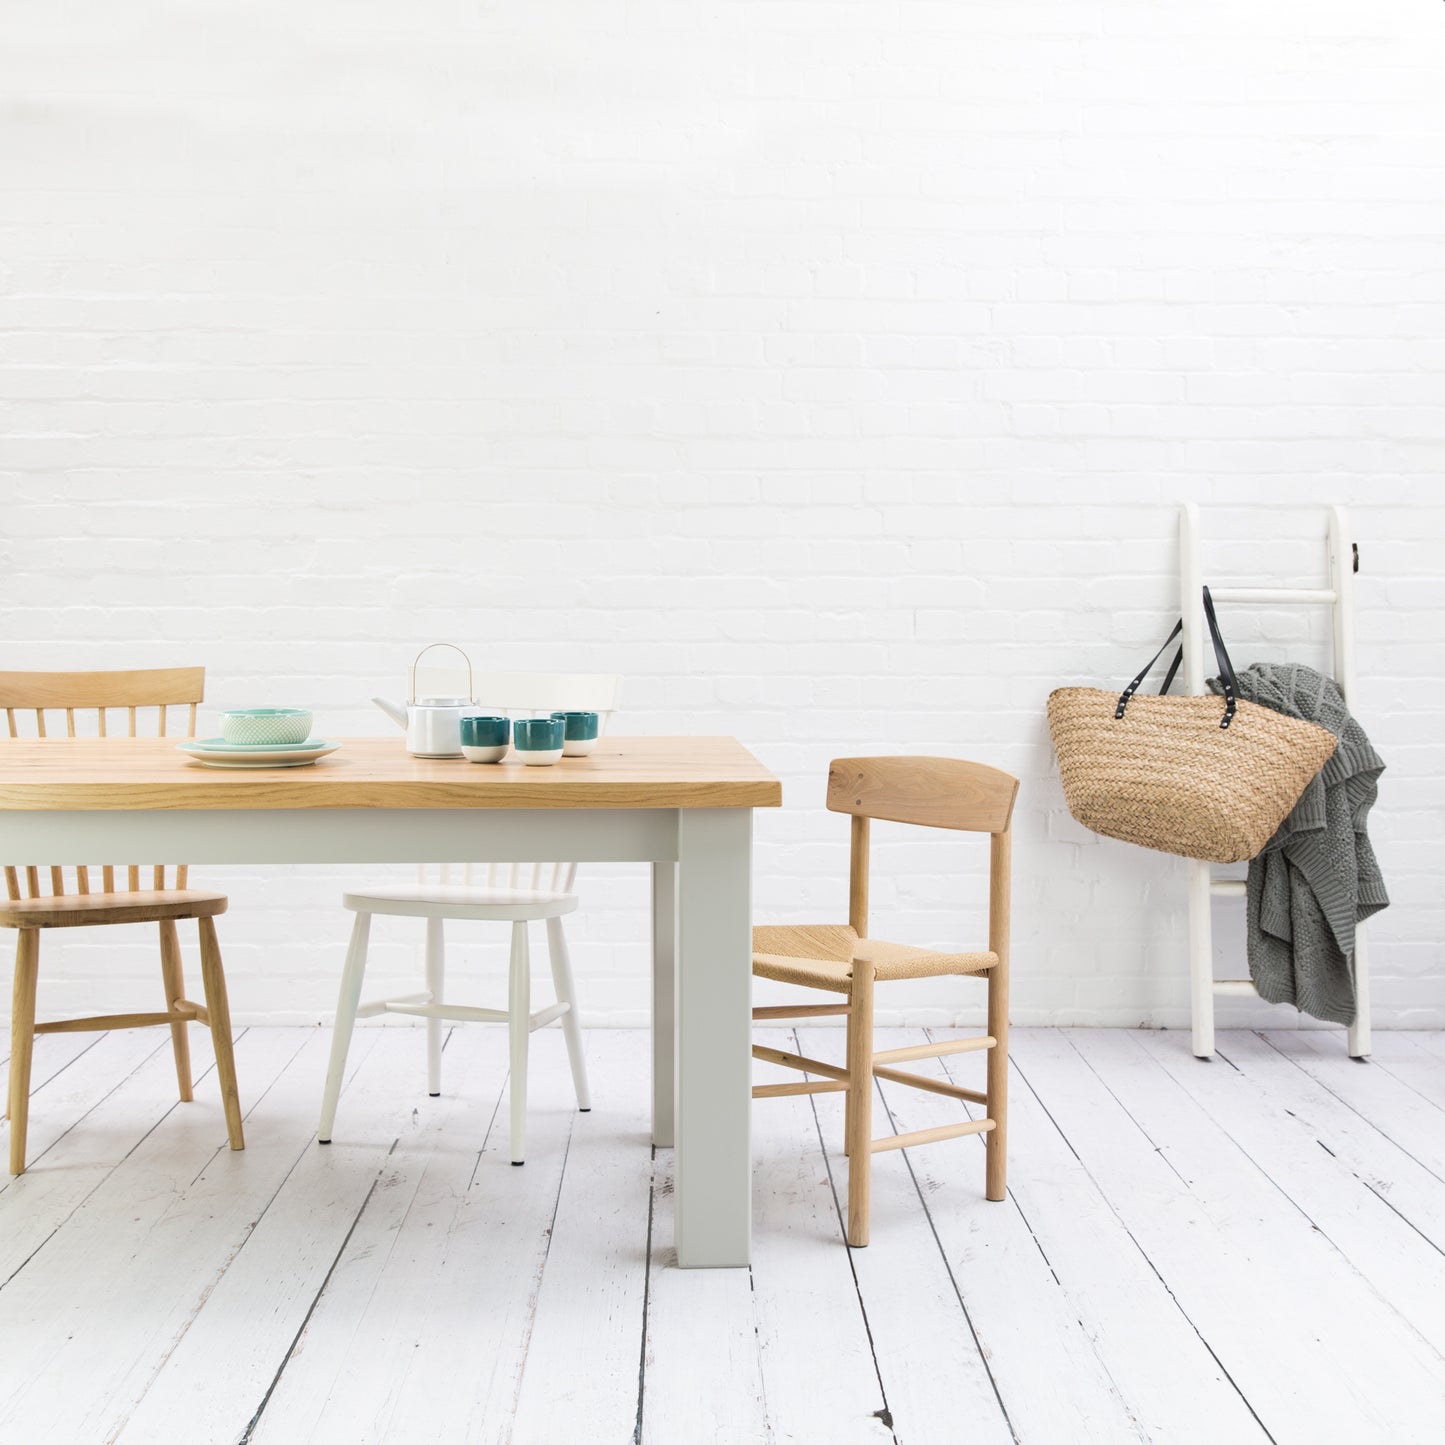 A Prime Oak Dining Table and chairs by Kiki in a white room, enhancing home furniture and interior decor.